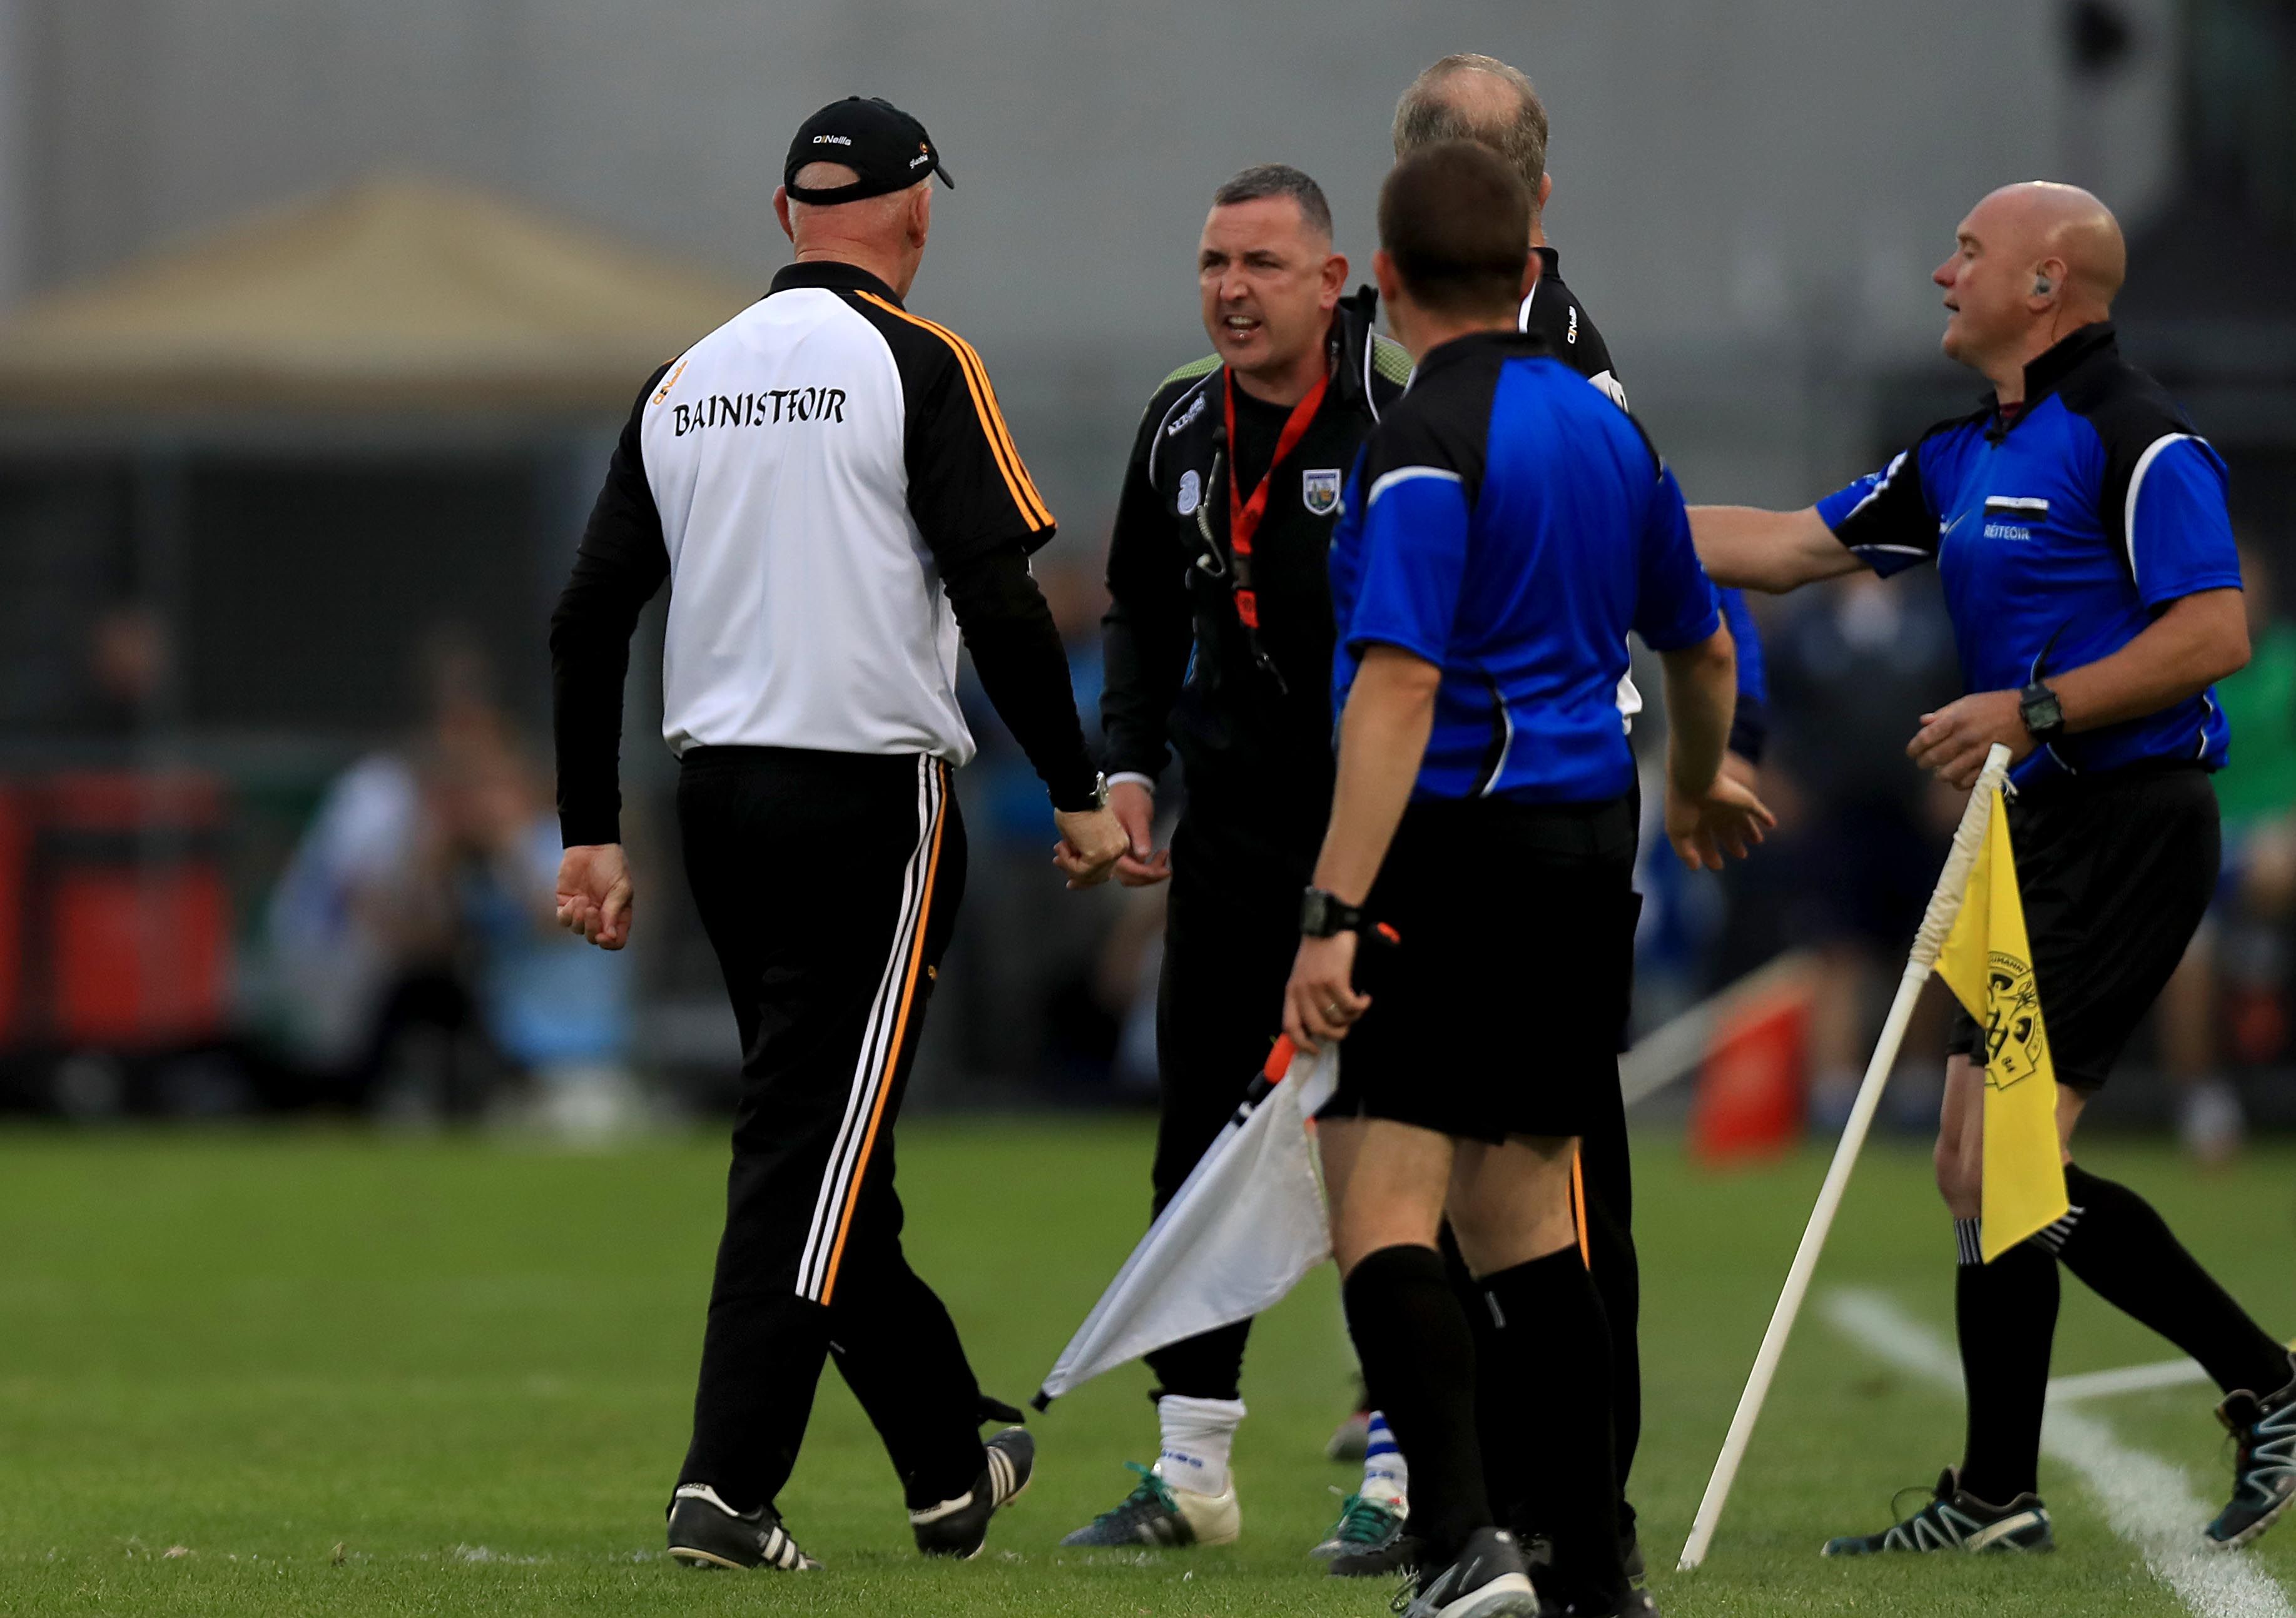 GAA All-Ireland Senior Hurling Championship Semi-Final Replay, Semple Stadium, Tipperary 13/8/2016 Kilkenny vs Waterford Kilkenny manager Brian Cody and Waterford selector Fintan O'Connor exchange words Mandatory Credit ©INPHO/Donall Farmer